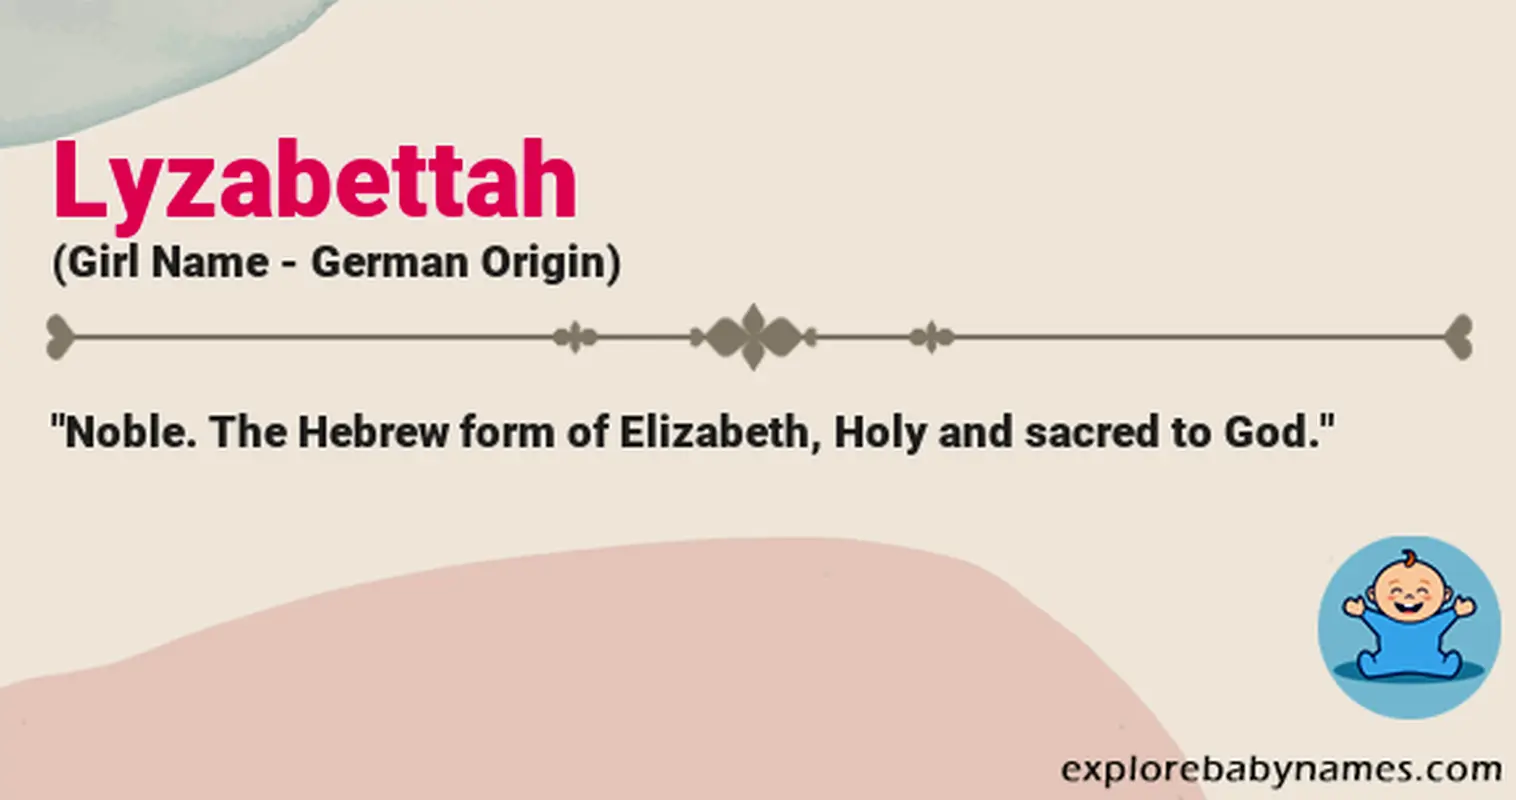 Meaning of Lyzabettah